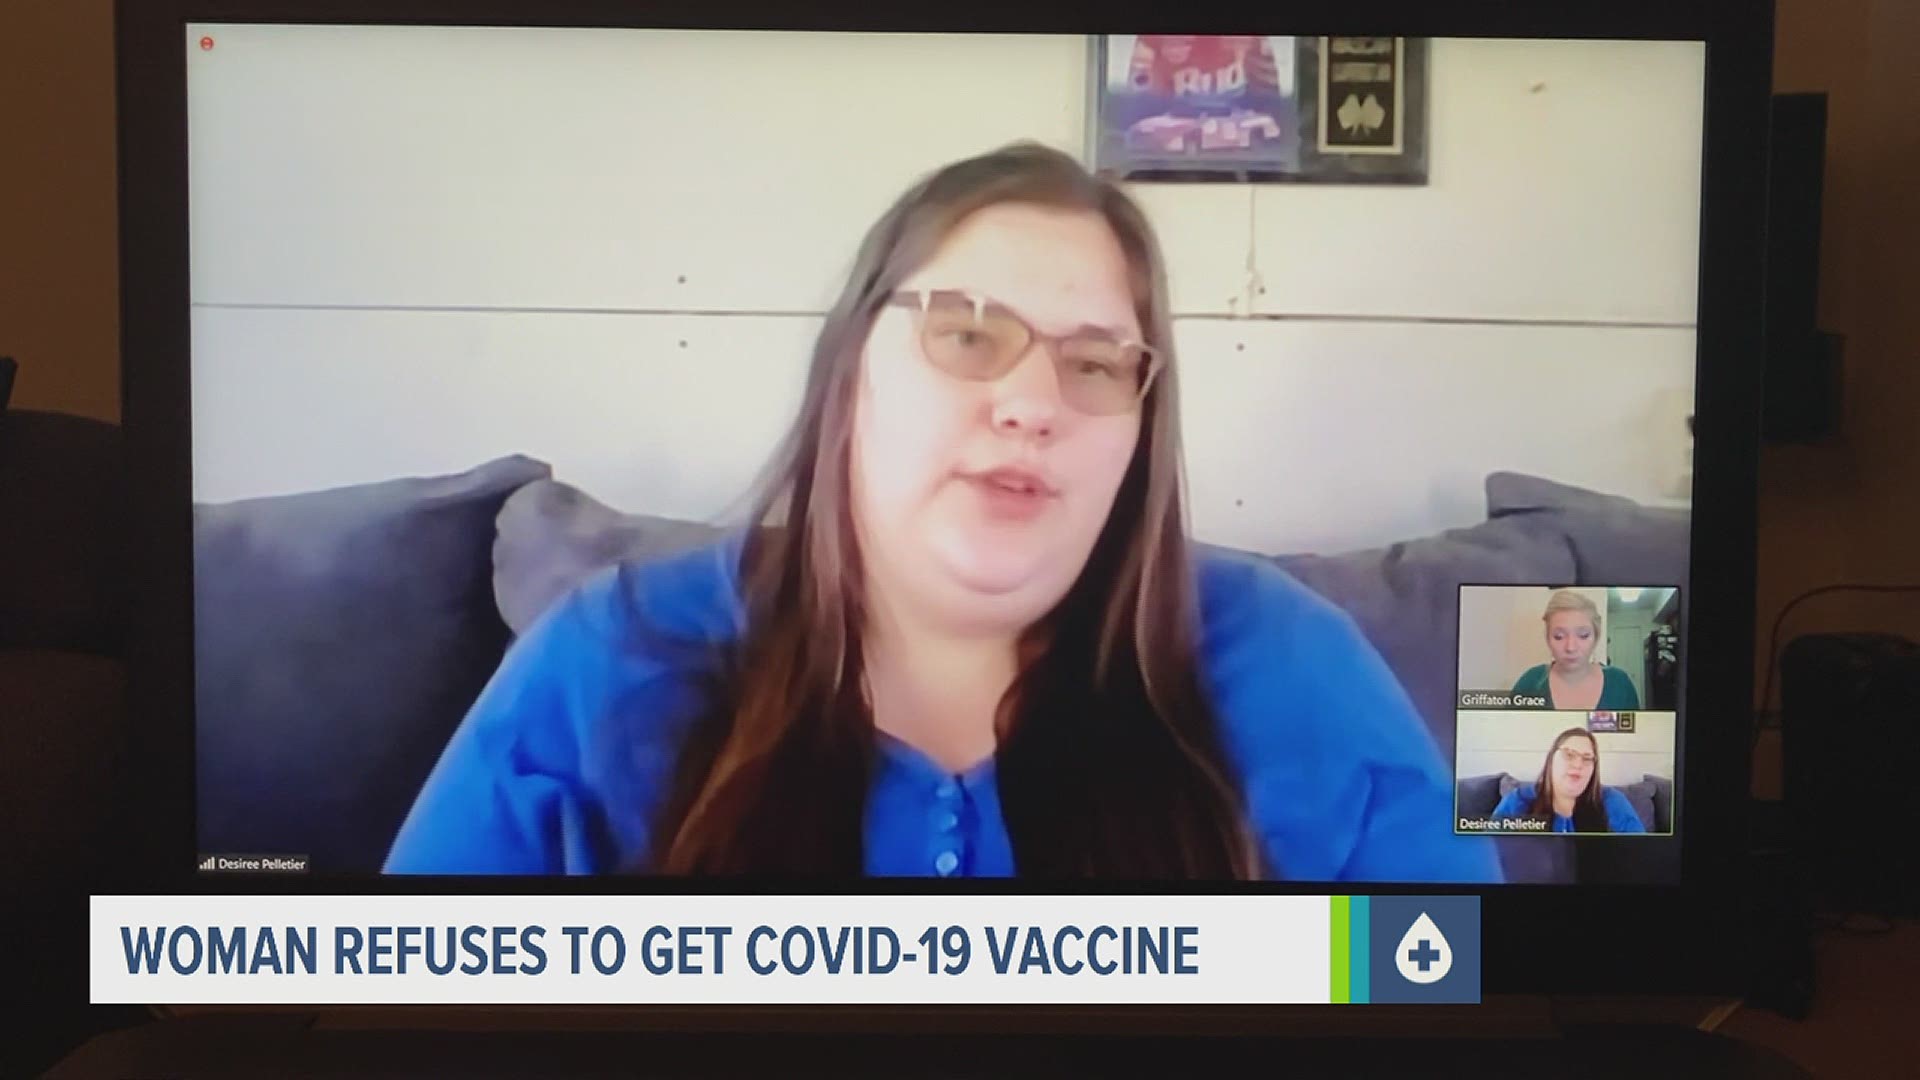 Desiree Pelletier of Newville says she is not anti-vaccination; she wants more time to decide if it's right for her body.